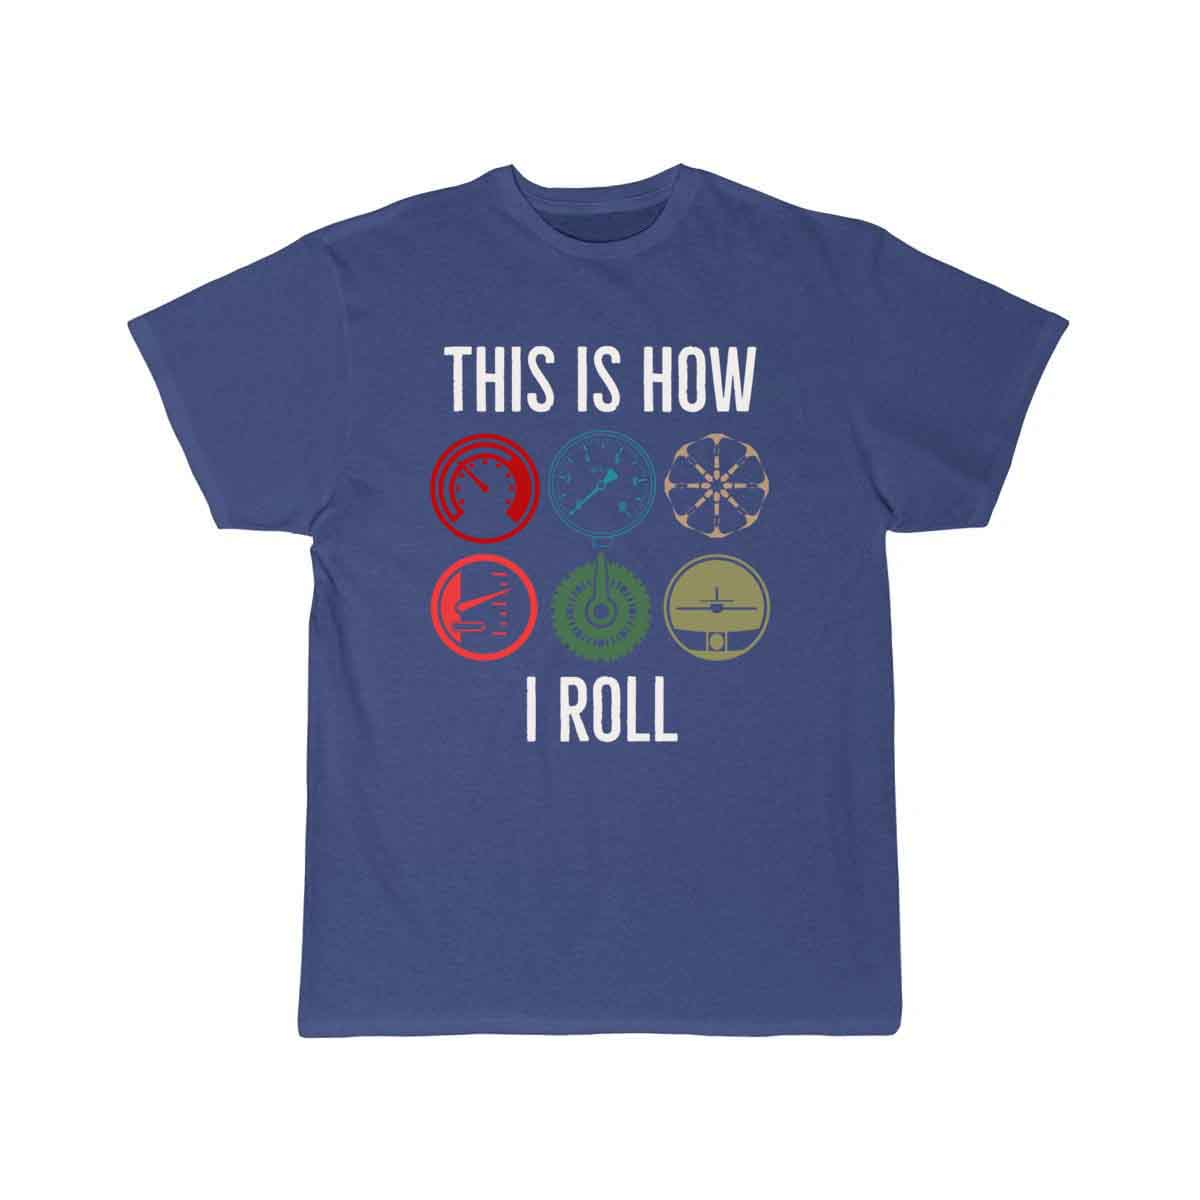 This is how we Roll T SHIRT THE AV8R